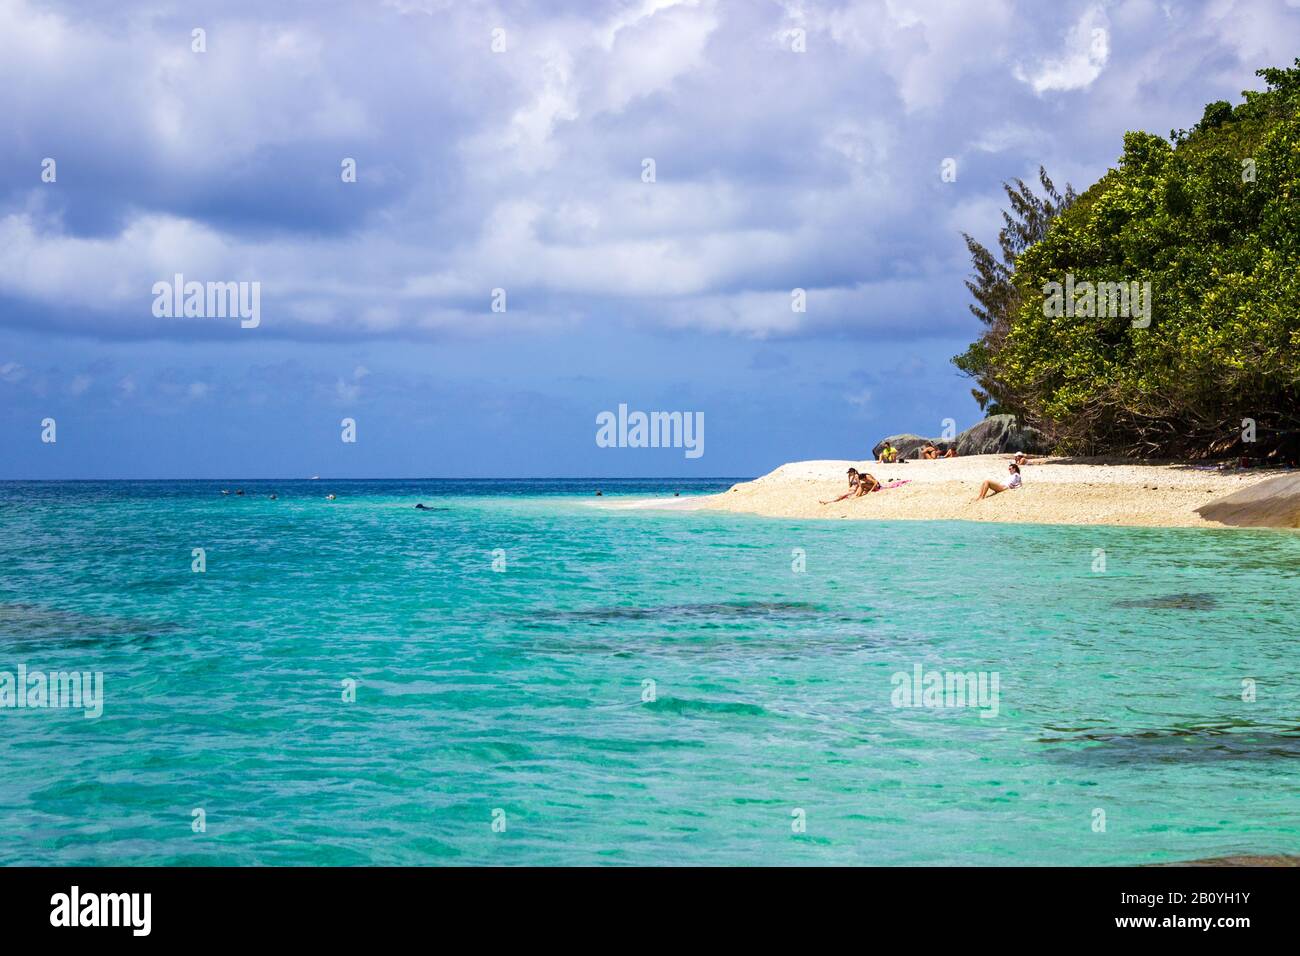 Bathers relax on the sands of Nudey Beach, Fitzroy Island, in the crystal clear waters of the Coral Sea near the coast of Queensland Australia. Stock Photo